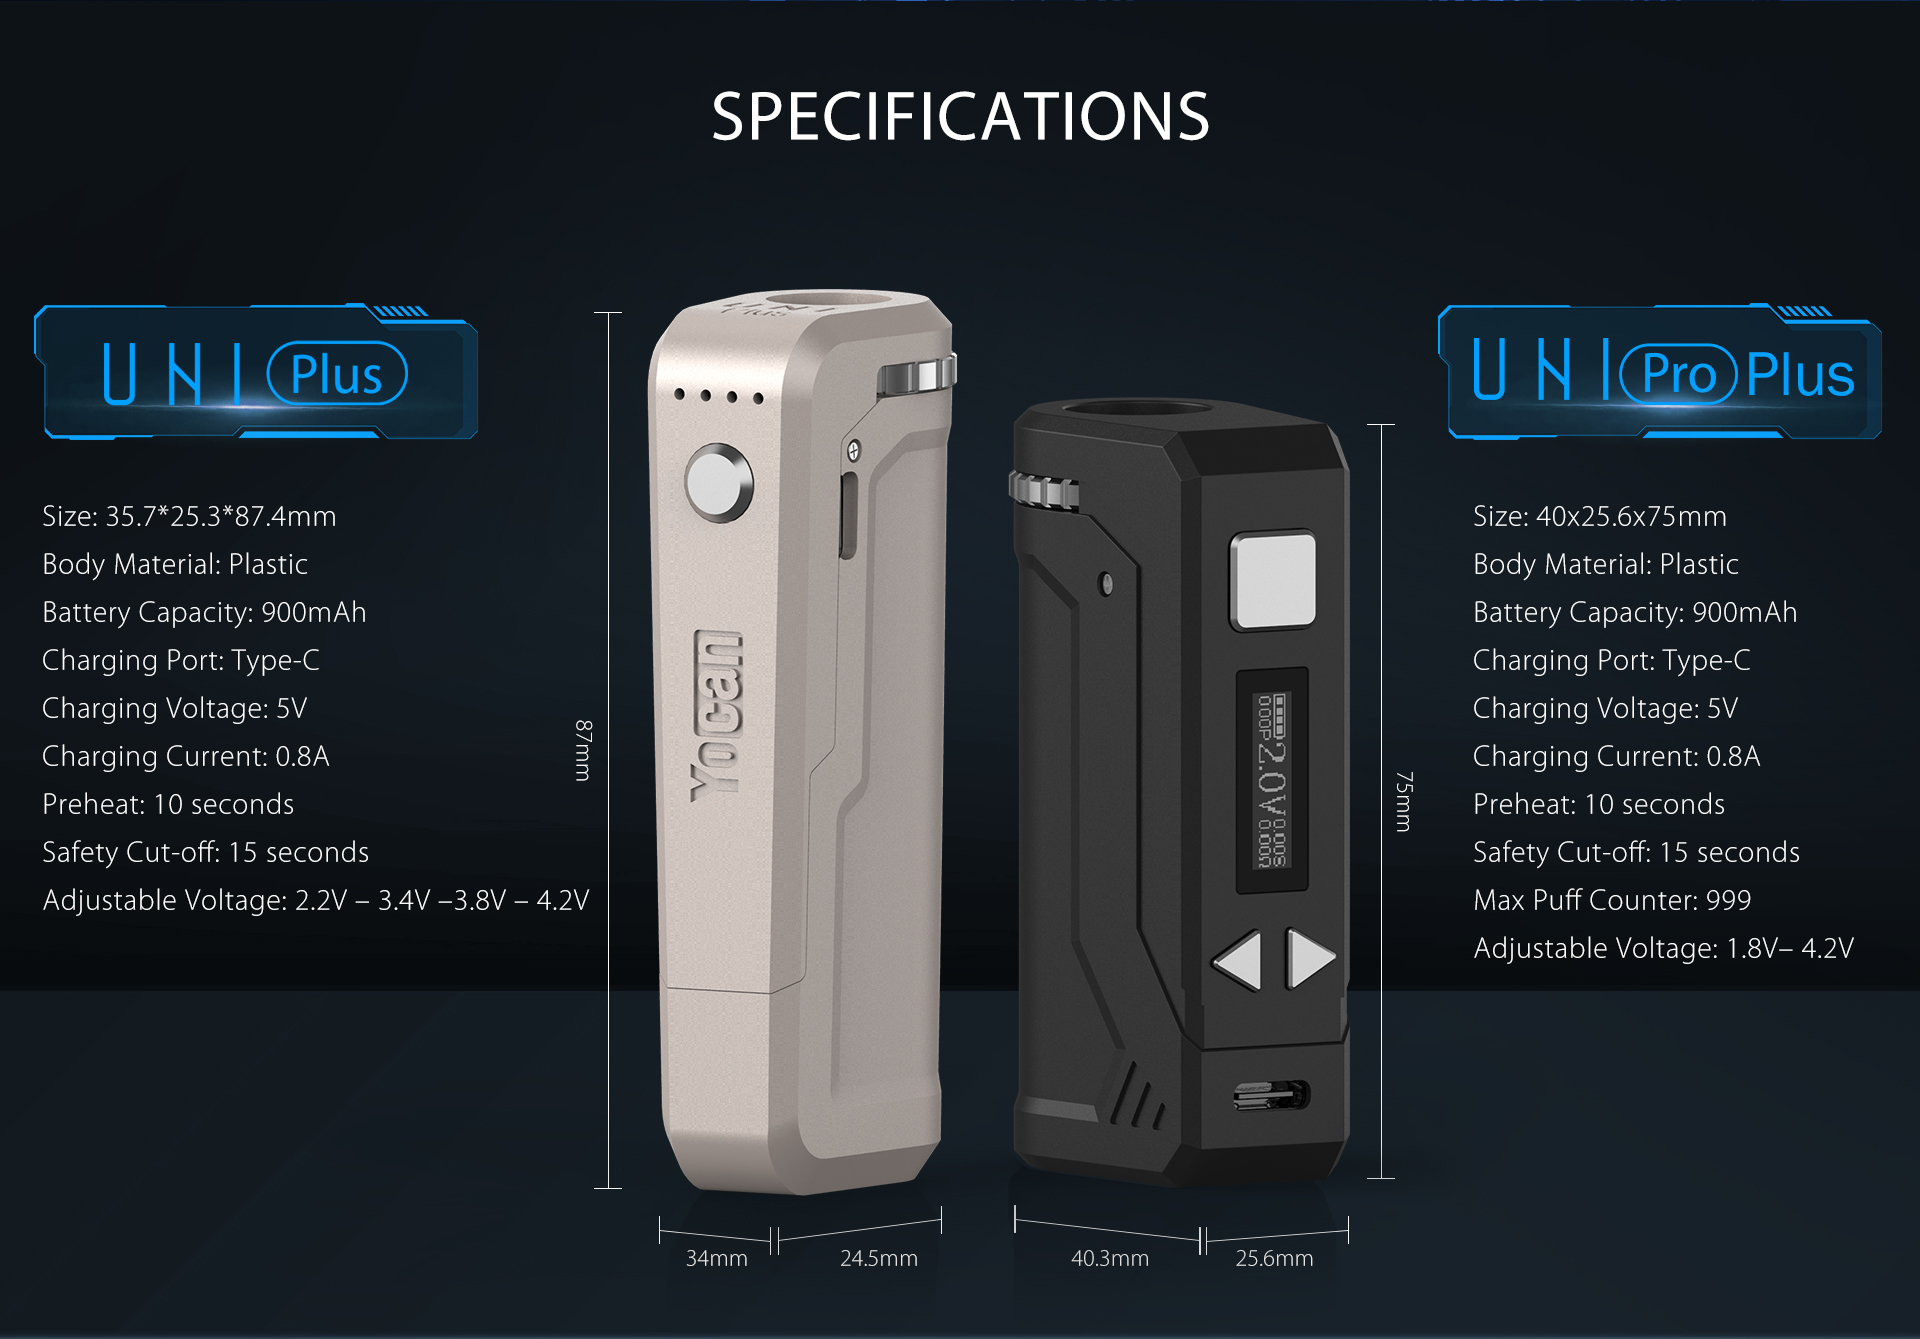 Yocan UNI Plus VV Battery specifications.